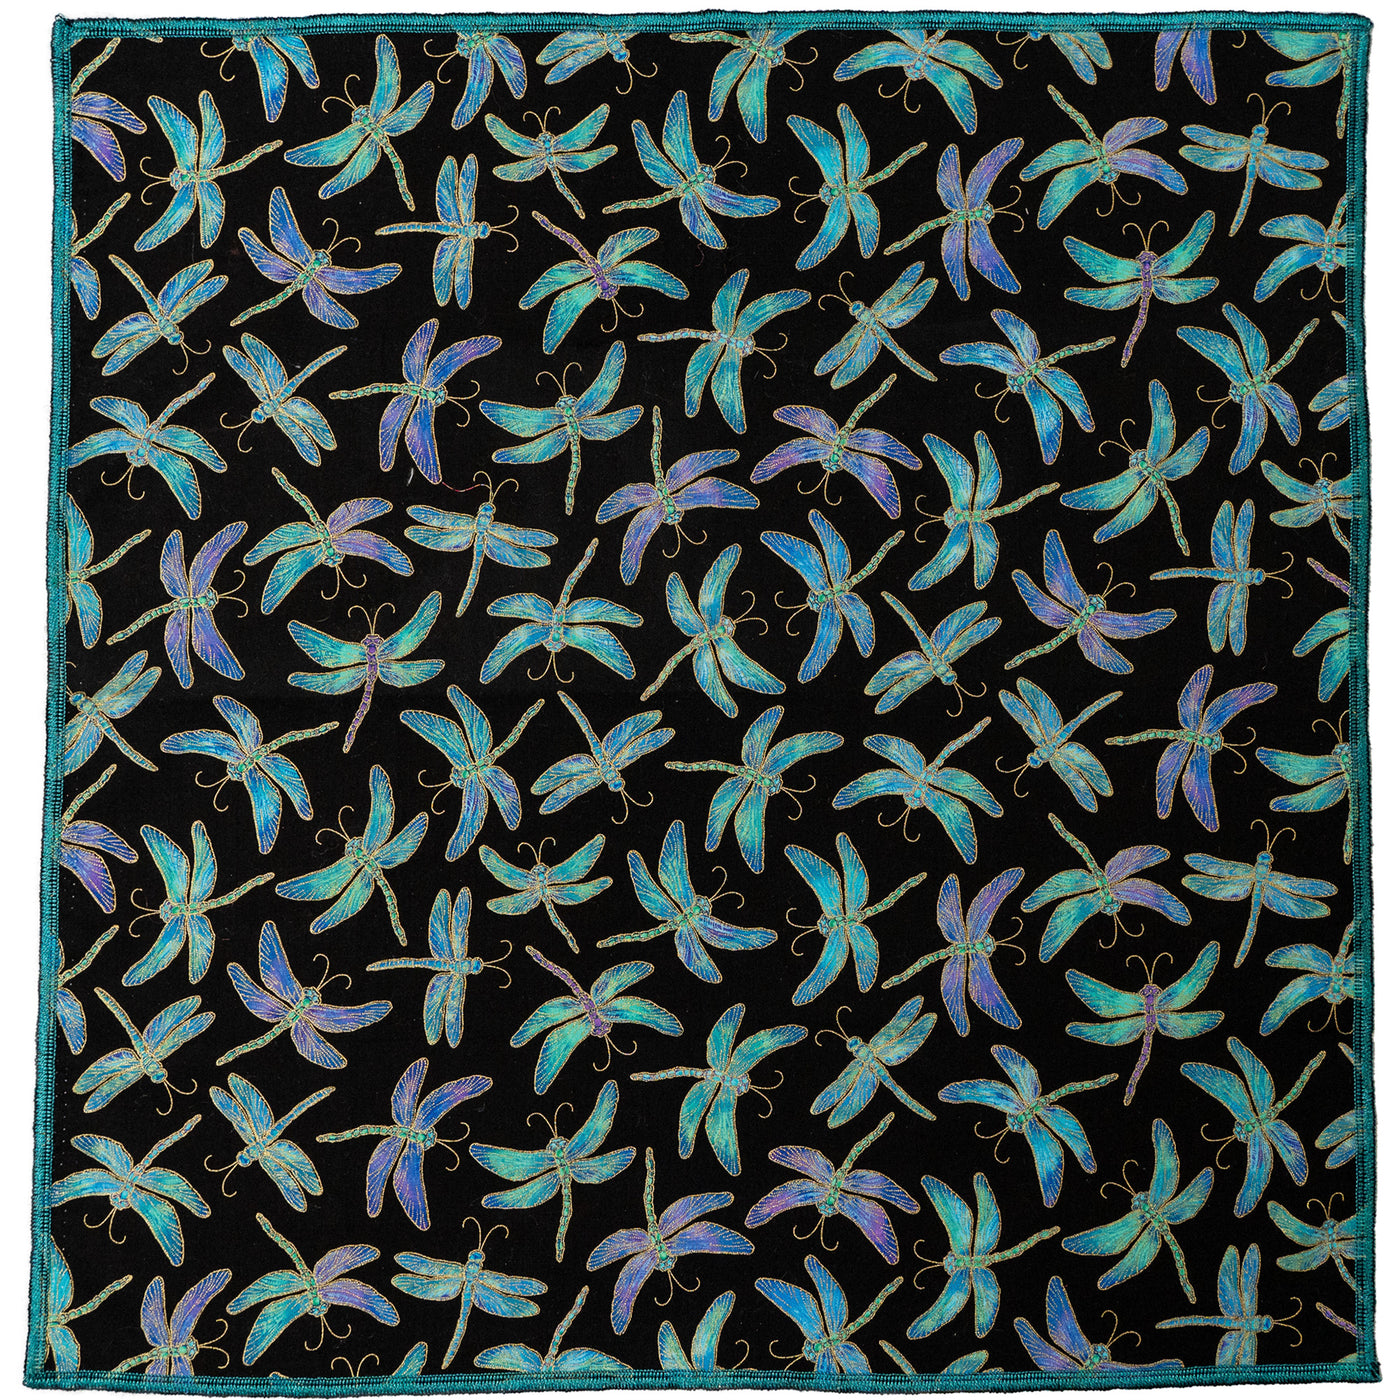 Handmade bandana with a beautiful dragonfly fabric, dragonflies in shades of blues, greens & purples